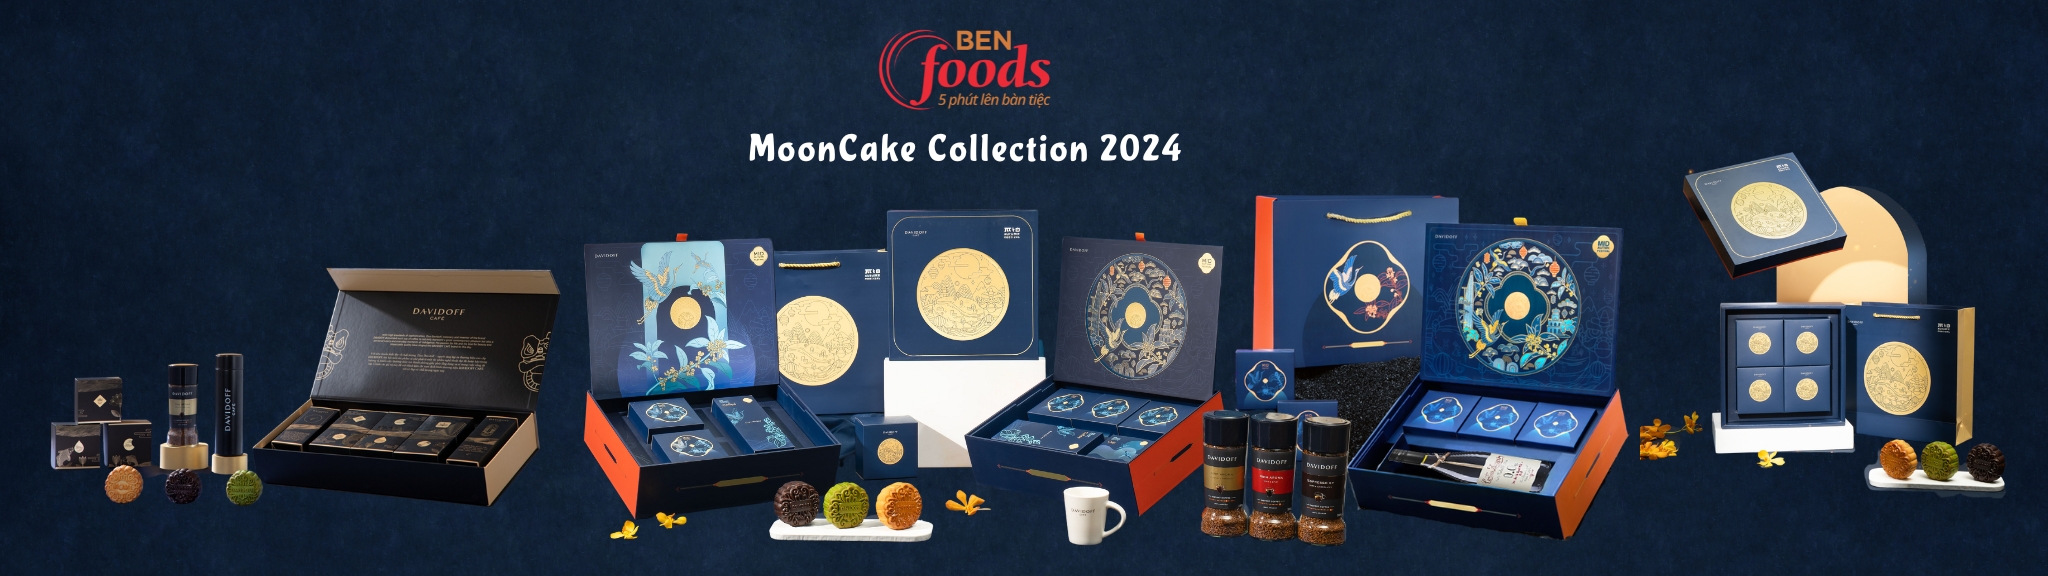 MoonCake Collection 2024